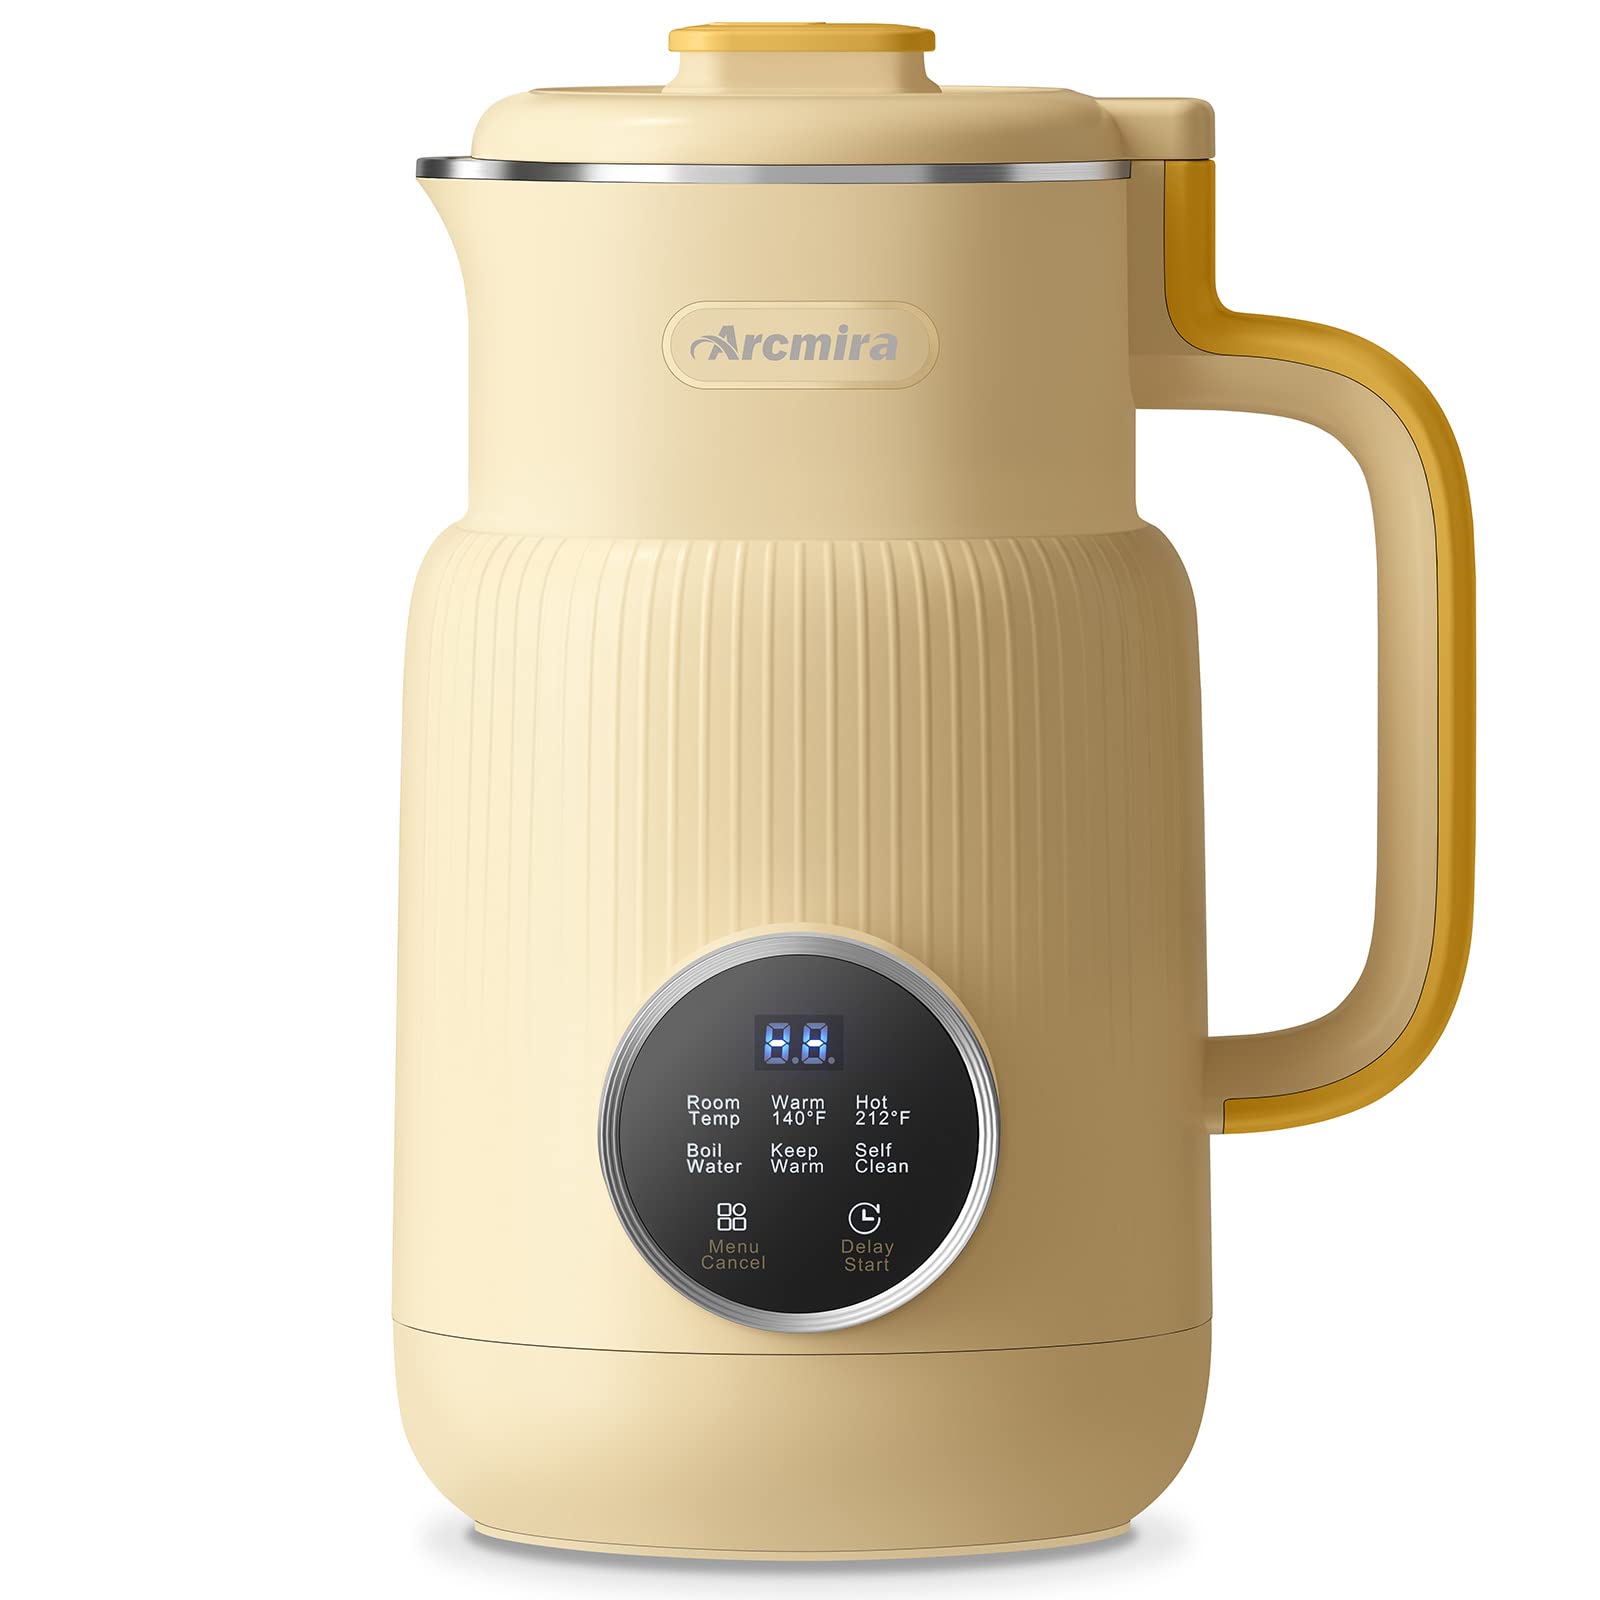 A yellow electric coffee maker with a yellow handle.